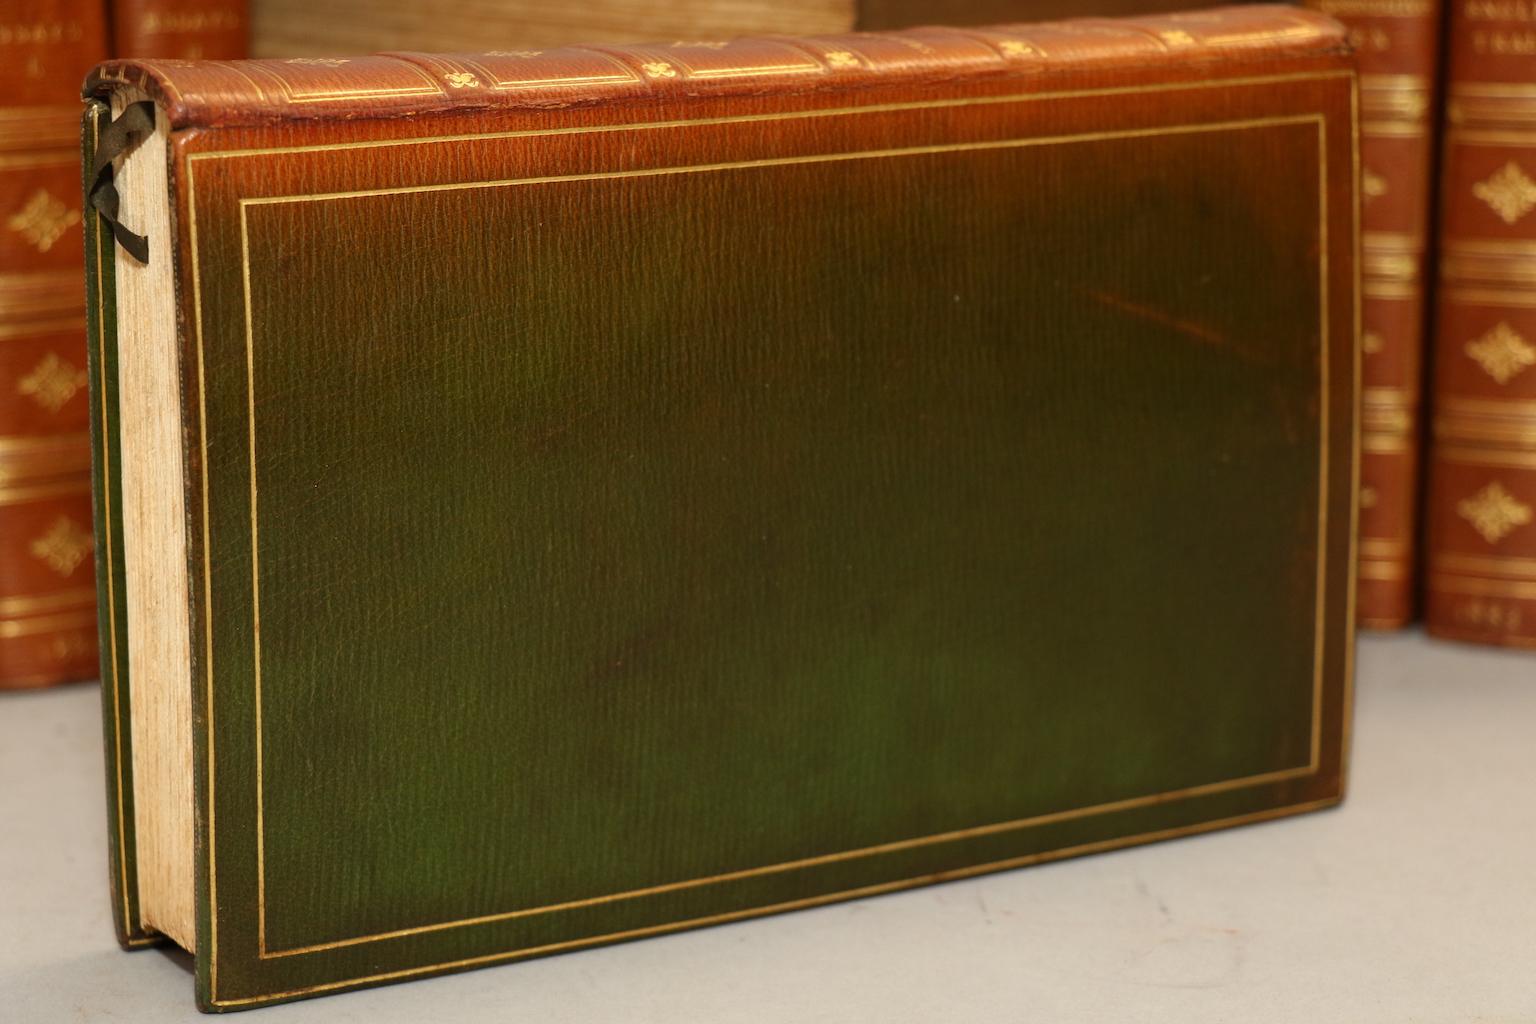 Riverside edition! Limited to 500 copies, this is #286. 11 volumes bound in full green Morocco with top edges gilt, raised bands, & gilt panels on spines. Spines have faded to an even tan color. Includes frontispiece. A very handsome set! Published